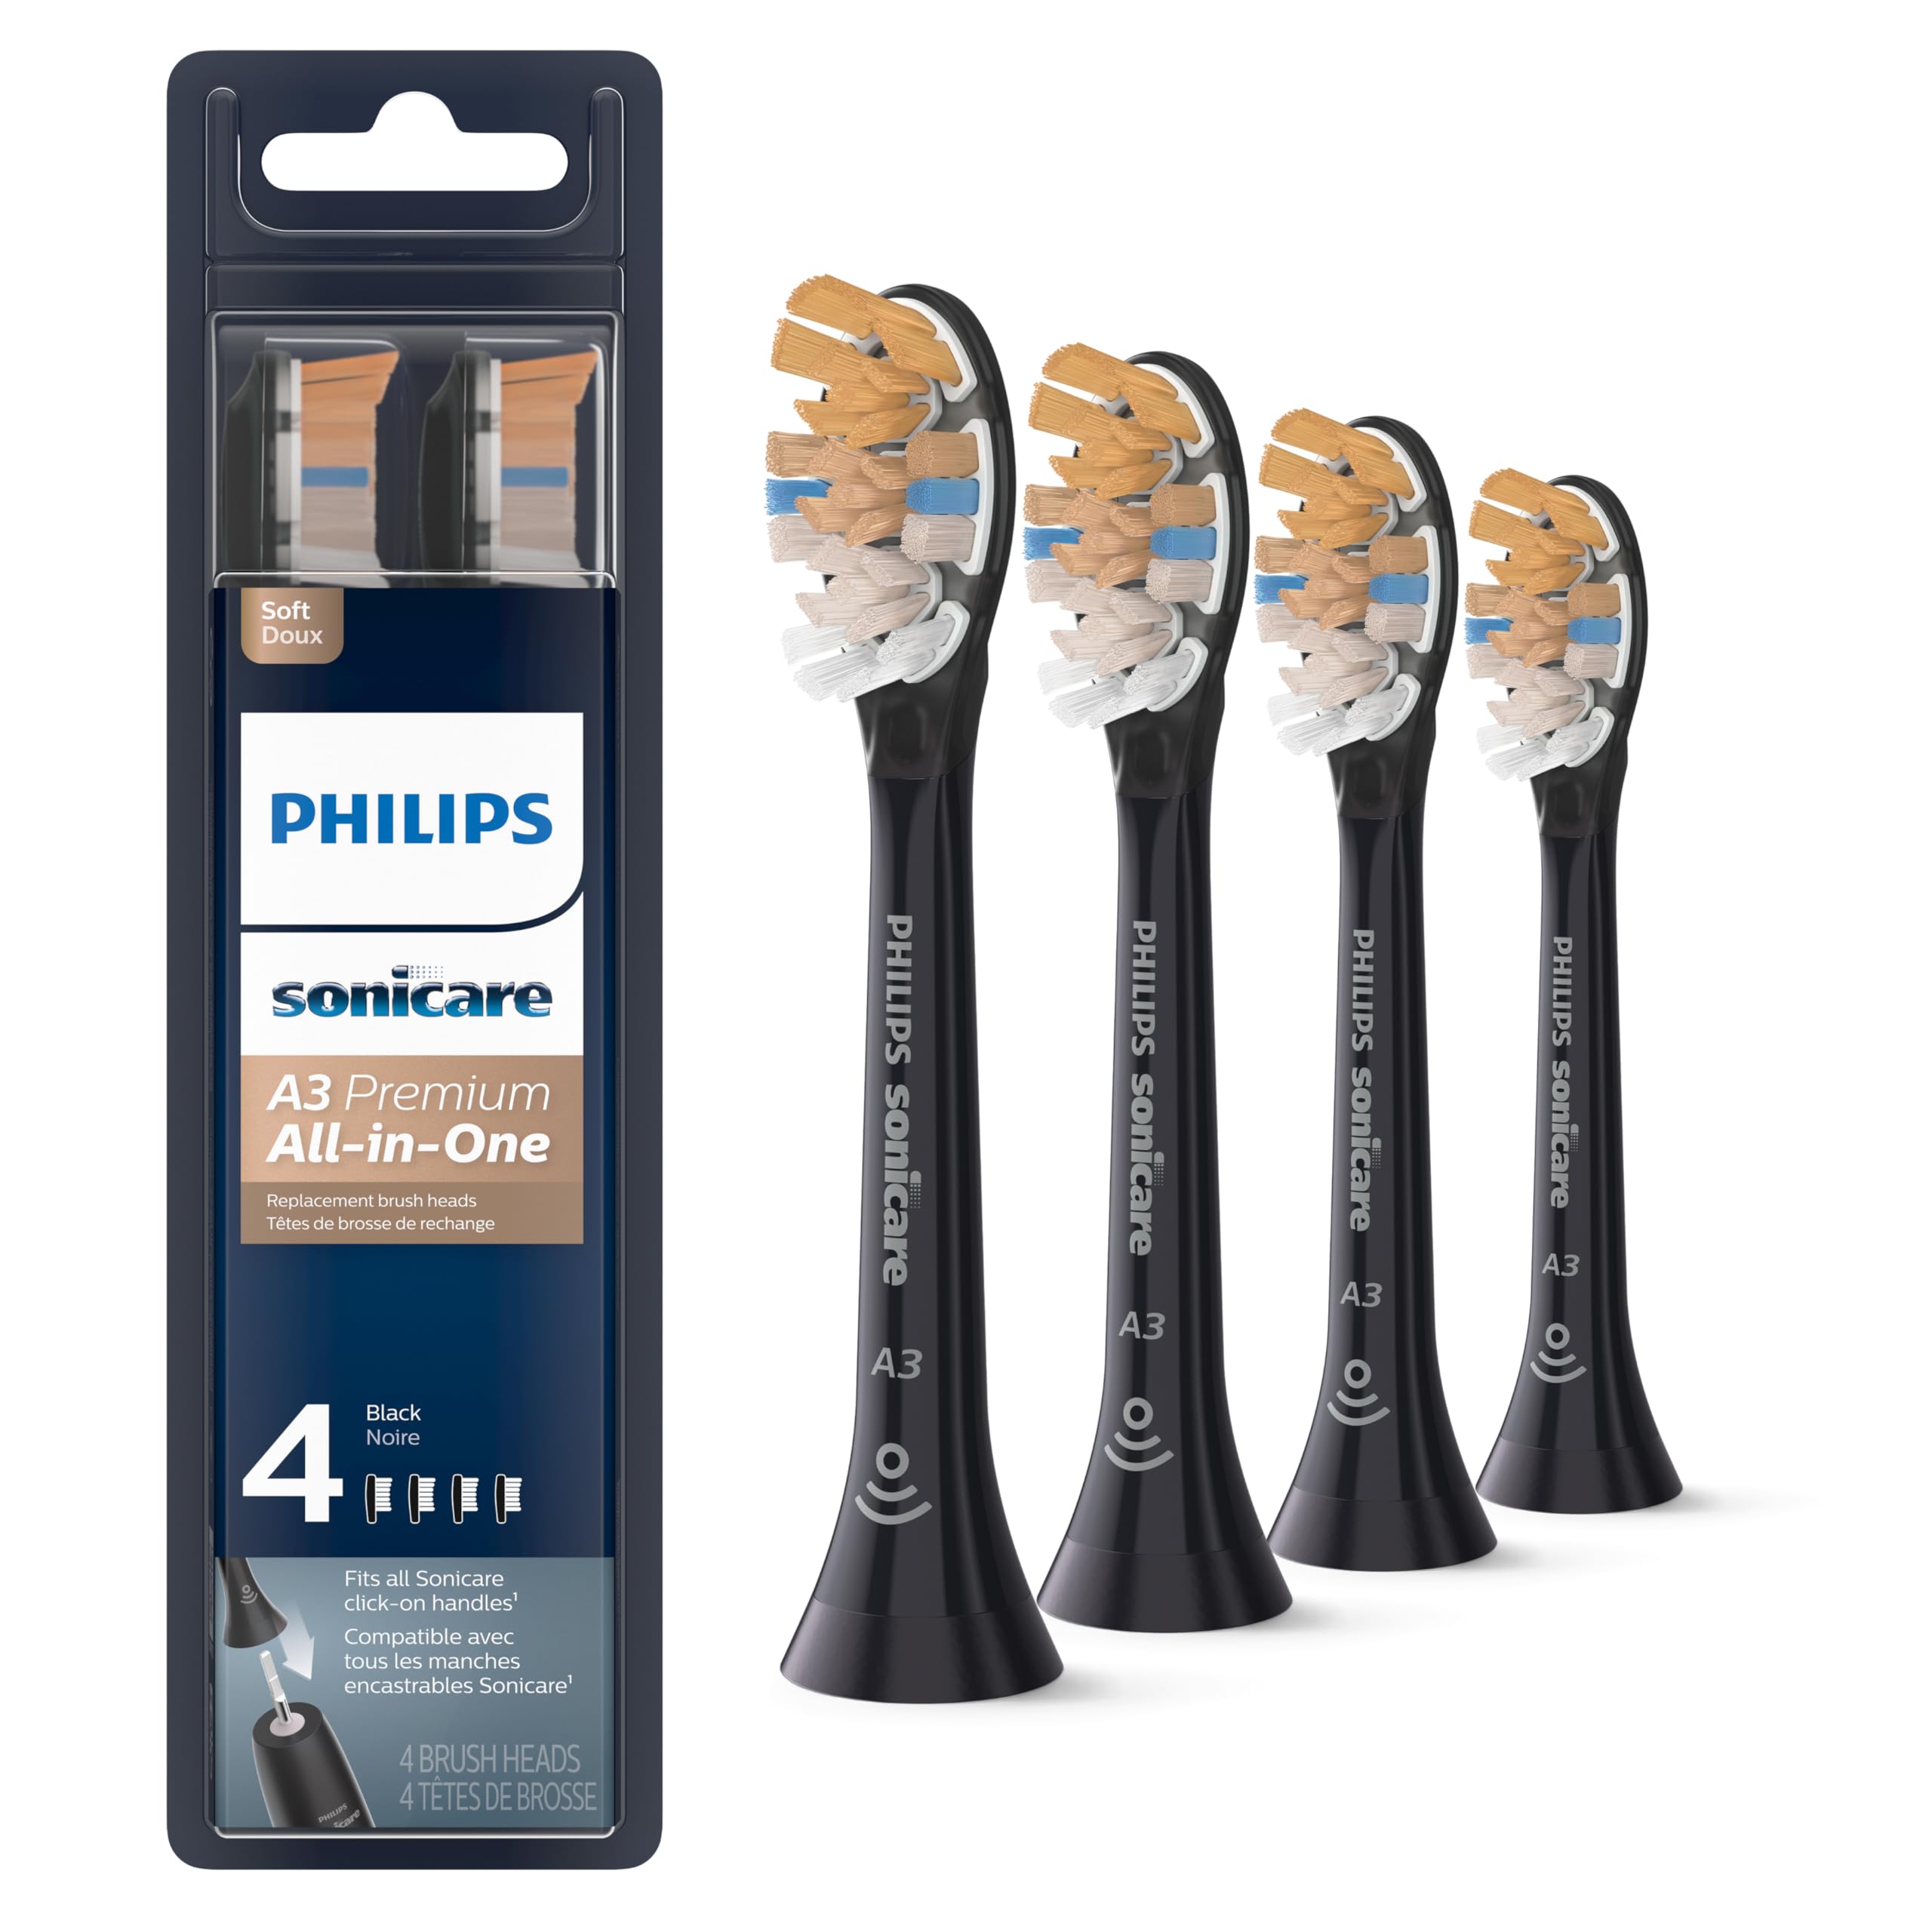 Philips Sonicare Premium All-in-One (A3) Replacement Toothbrush Heads, HX9094/95, Smart Recognition, Black 4-pk